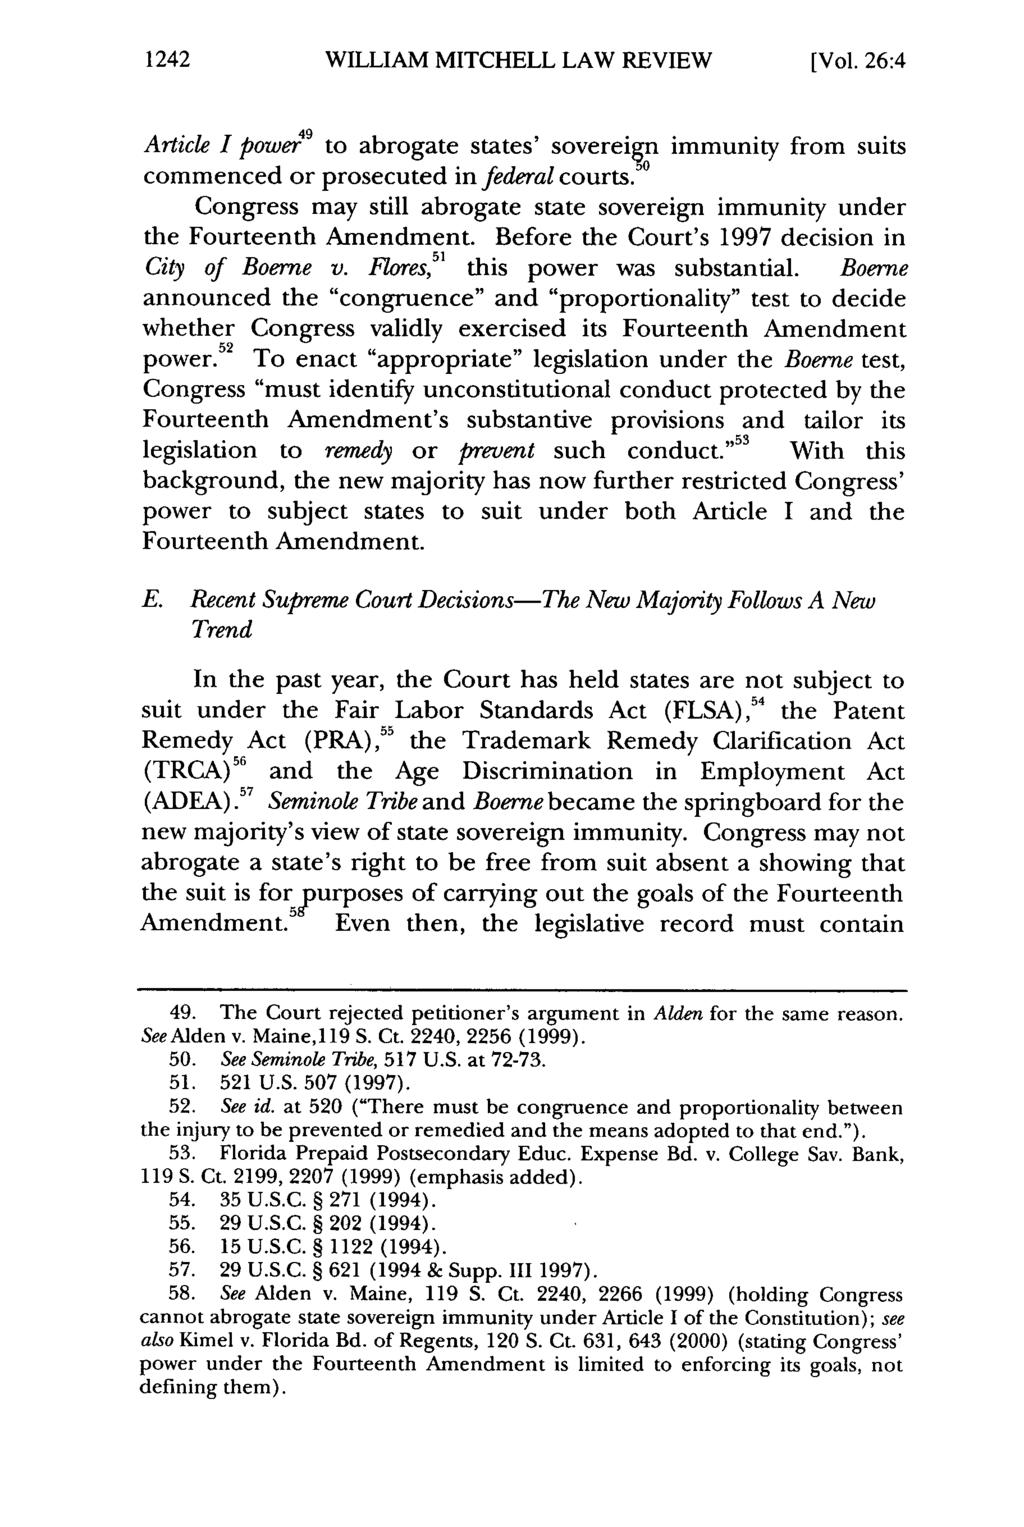 1242 William WILLIAM Mitchell Law MITCHELL Review, Vol. 26, LAW Iss. 4 [2000], REVIEW Art. 12 [Vol.